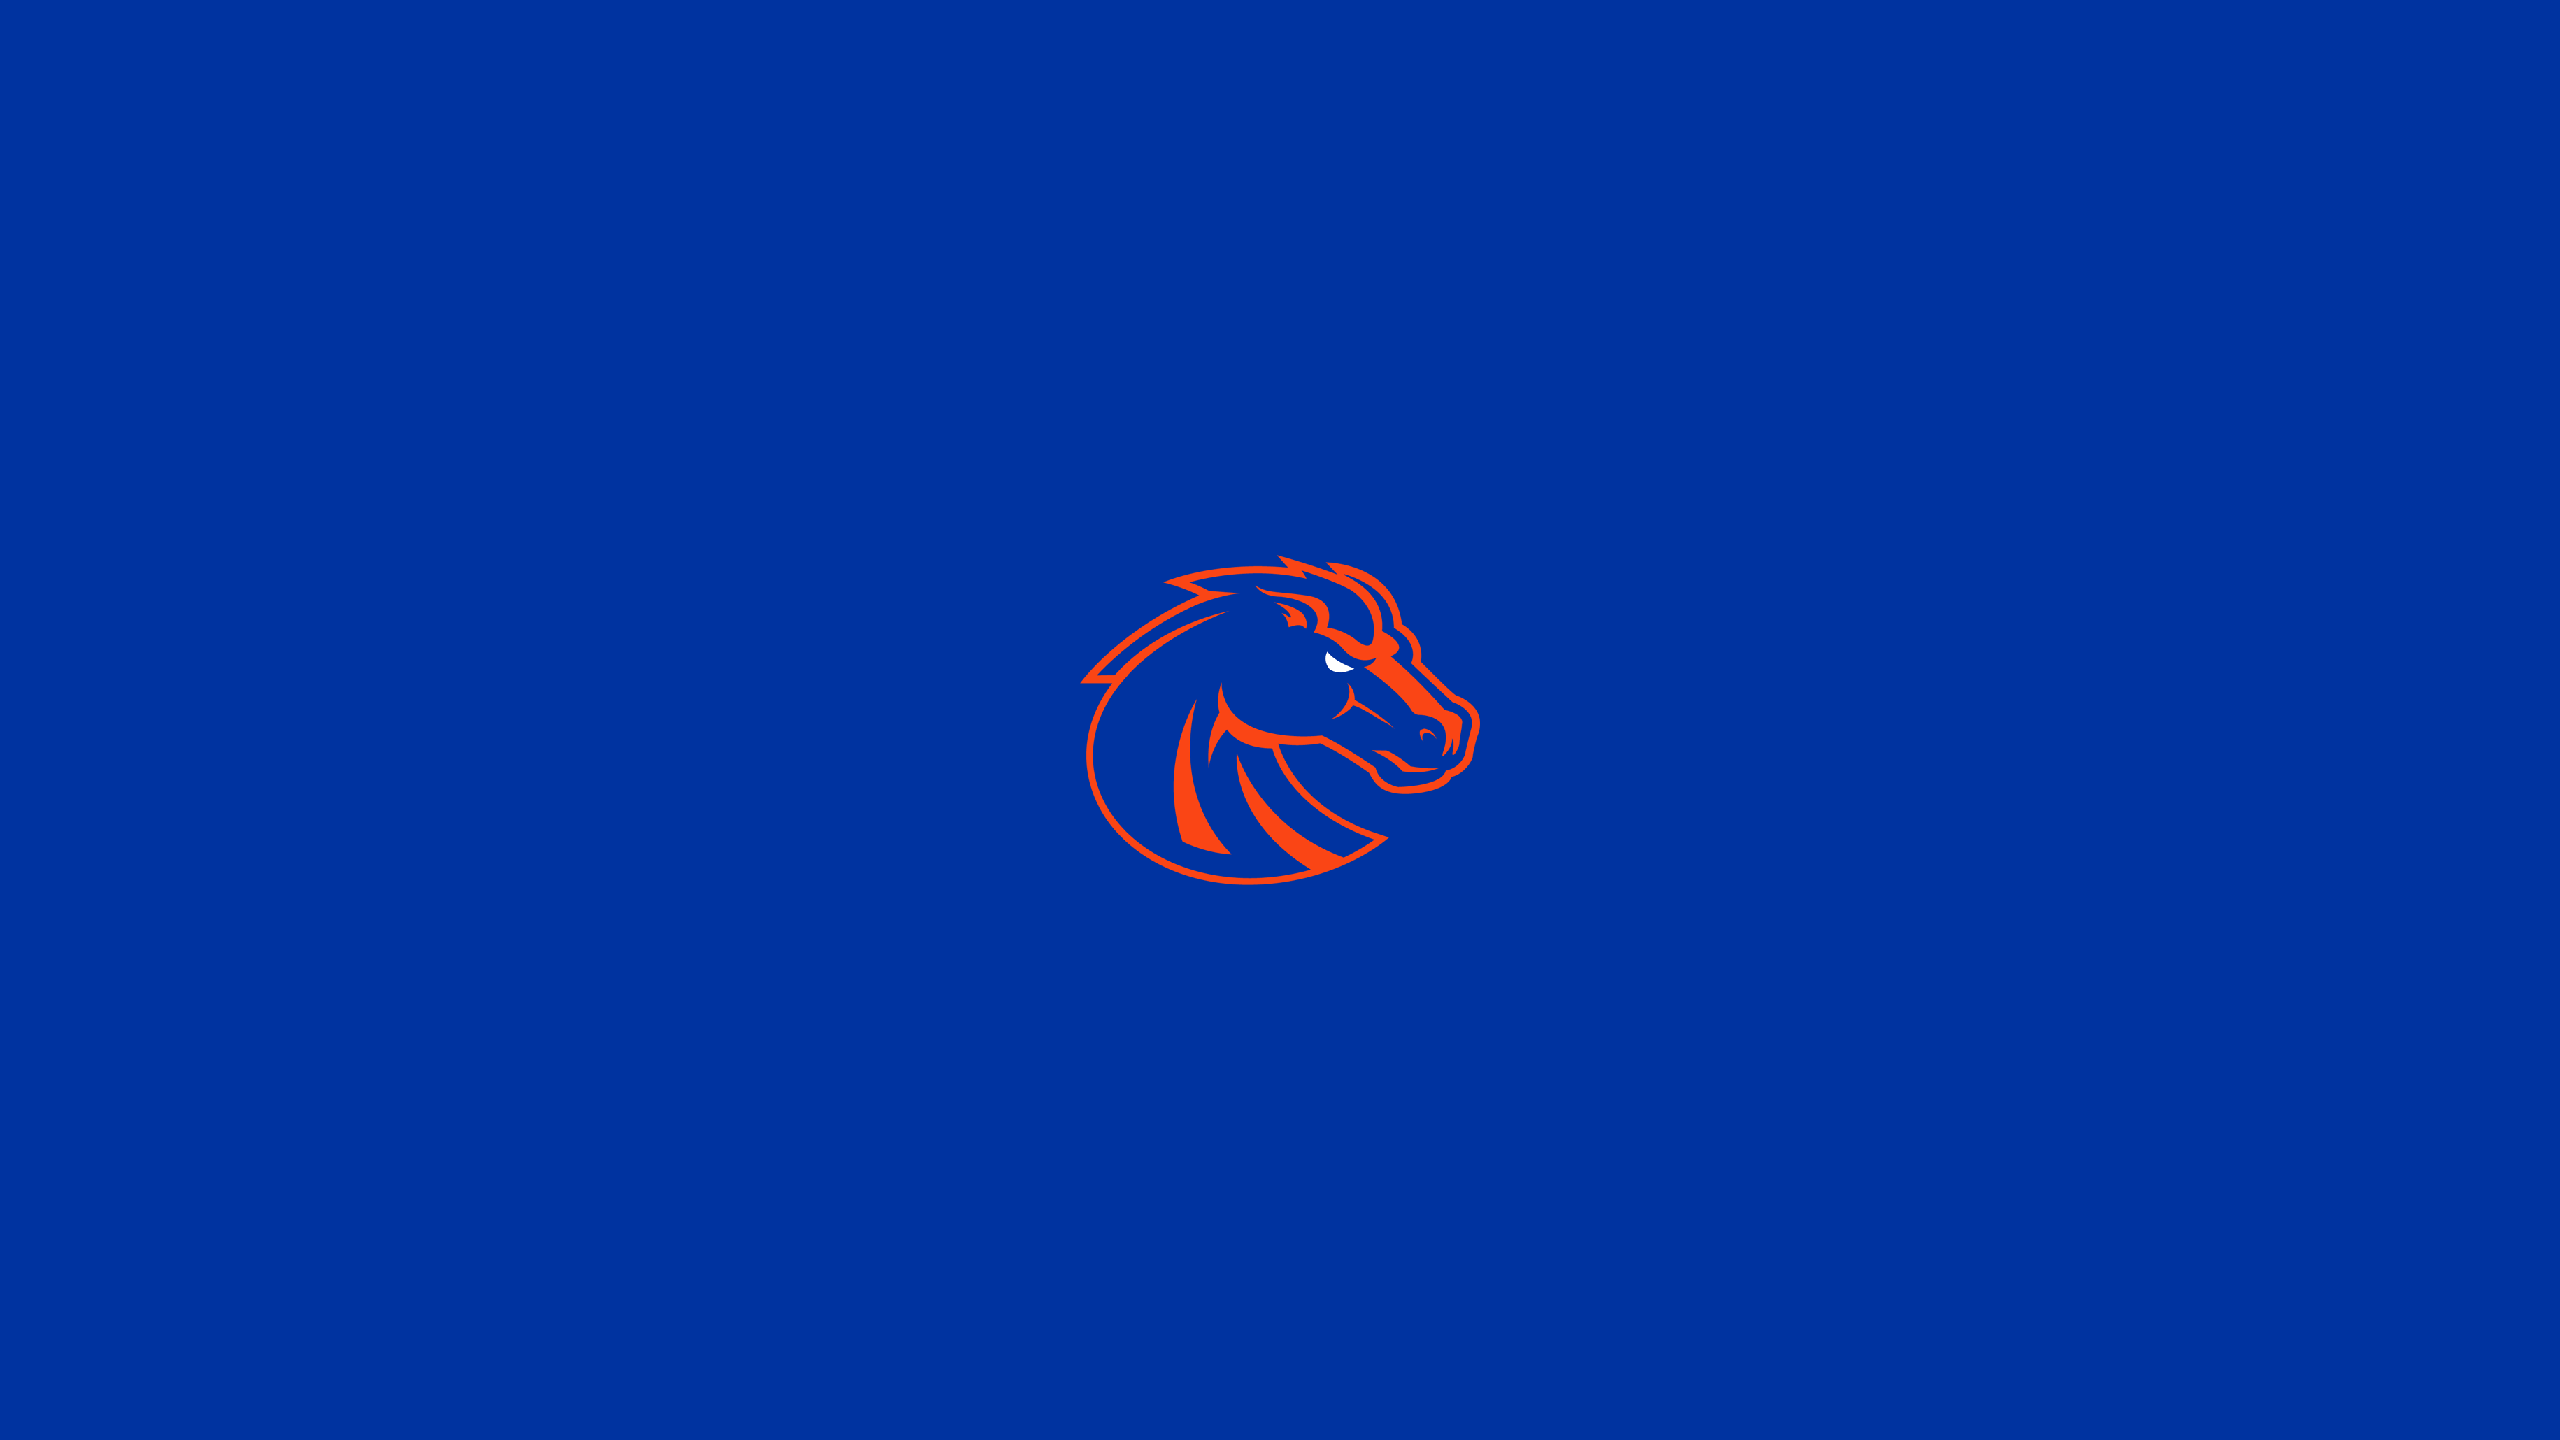 Boise State Broncos Basketball - NCAAB - Square Bettor